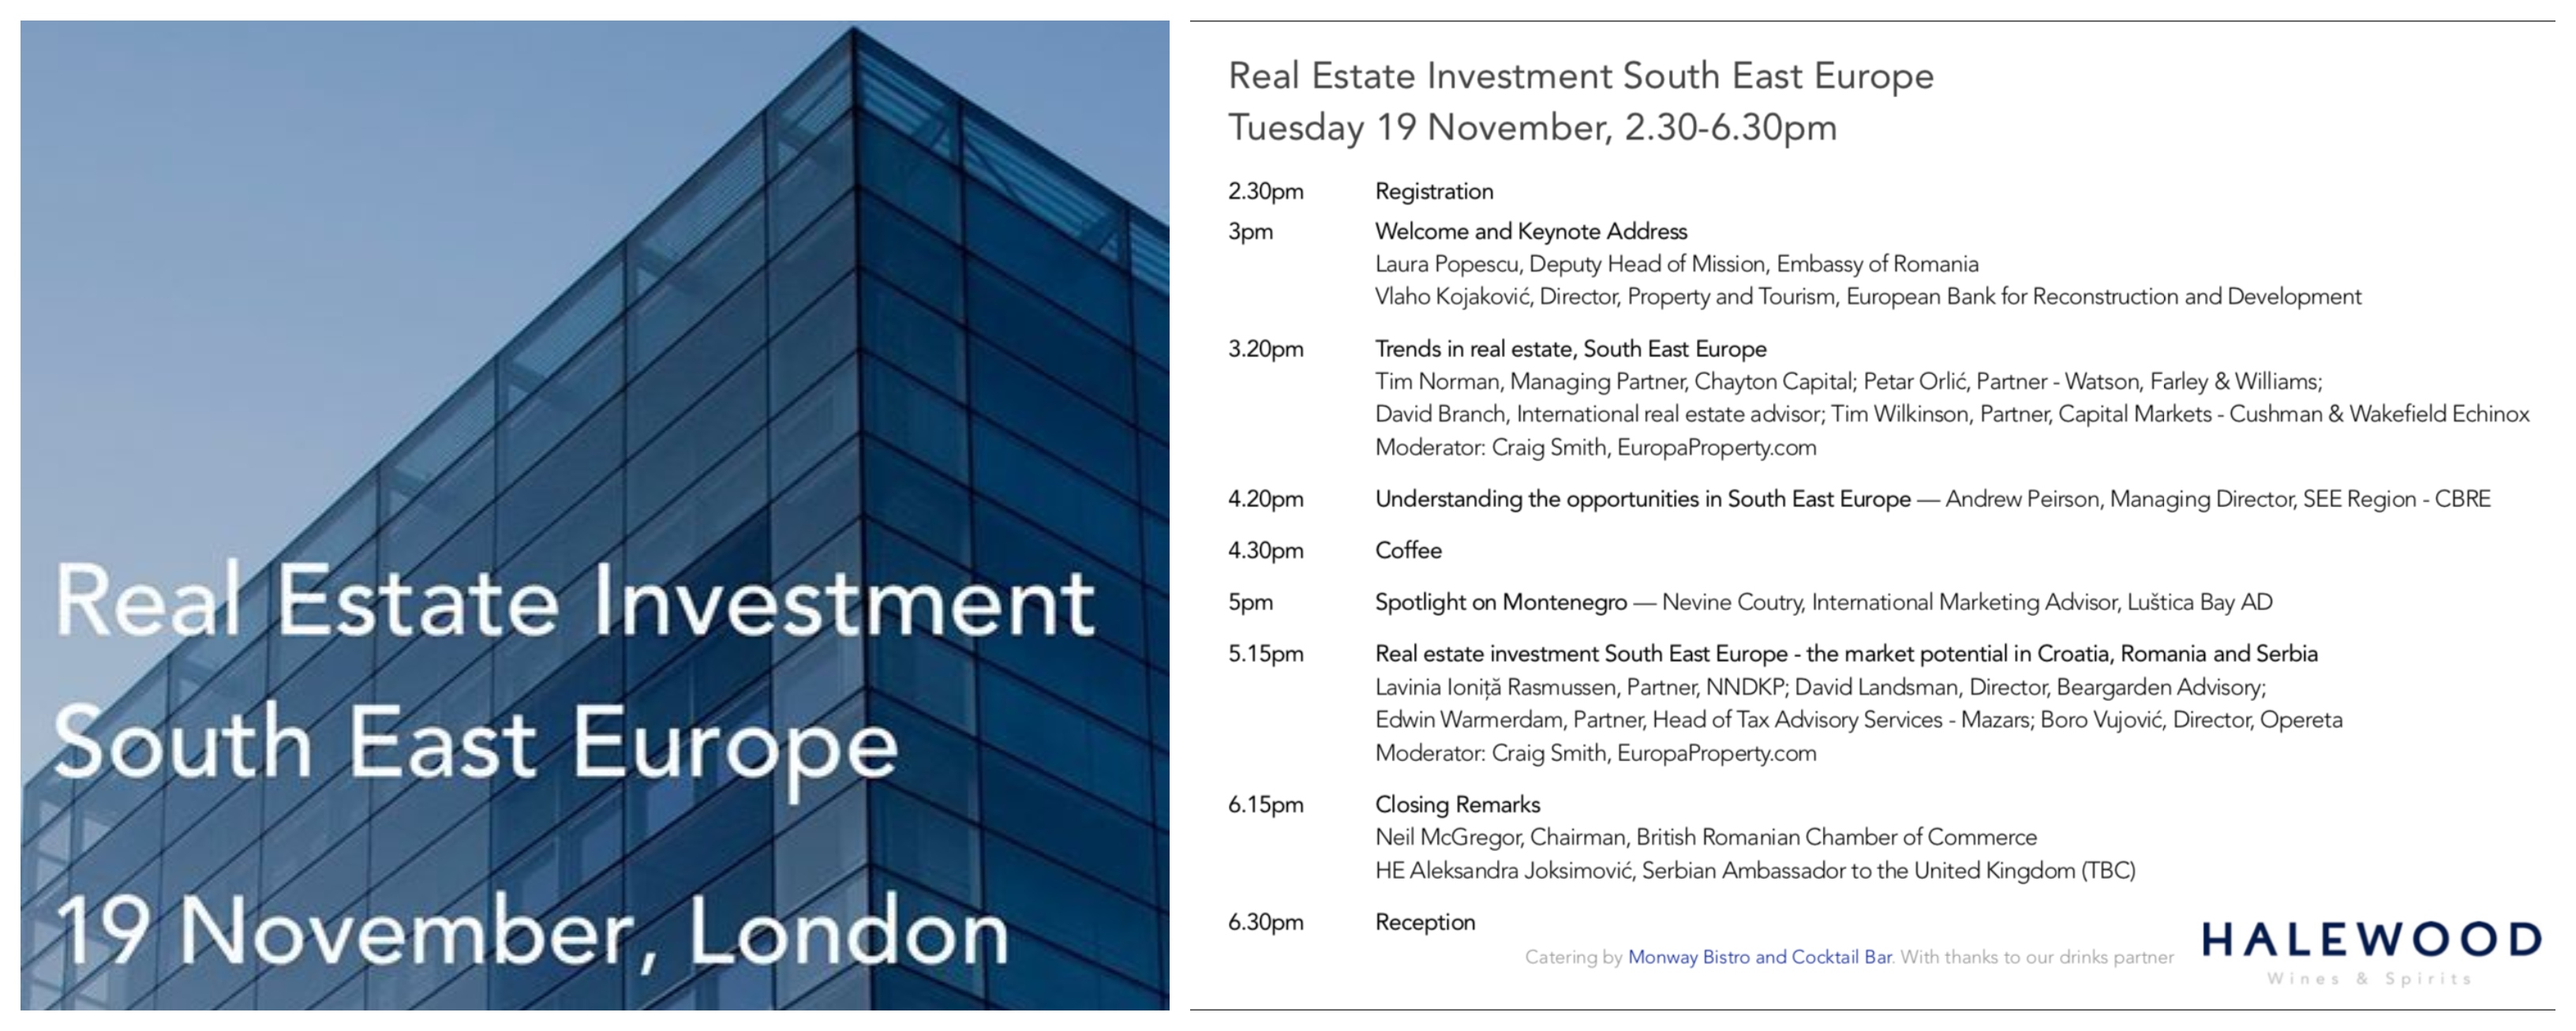 to Real Estate Investment South East Europe on